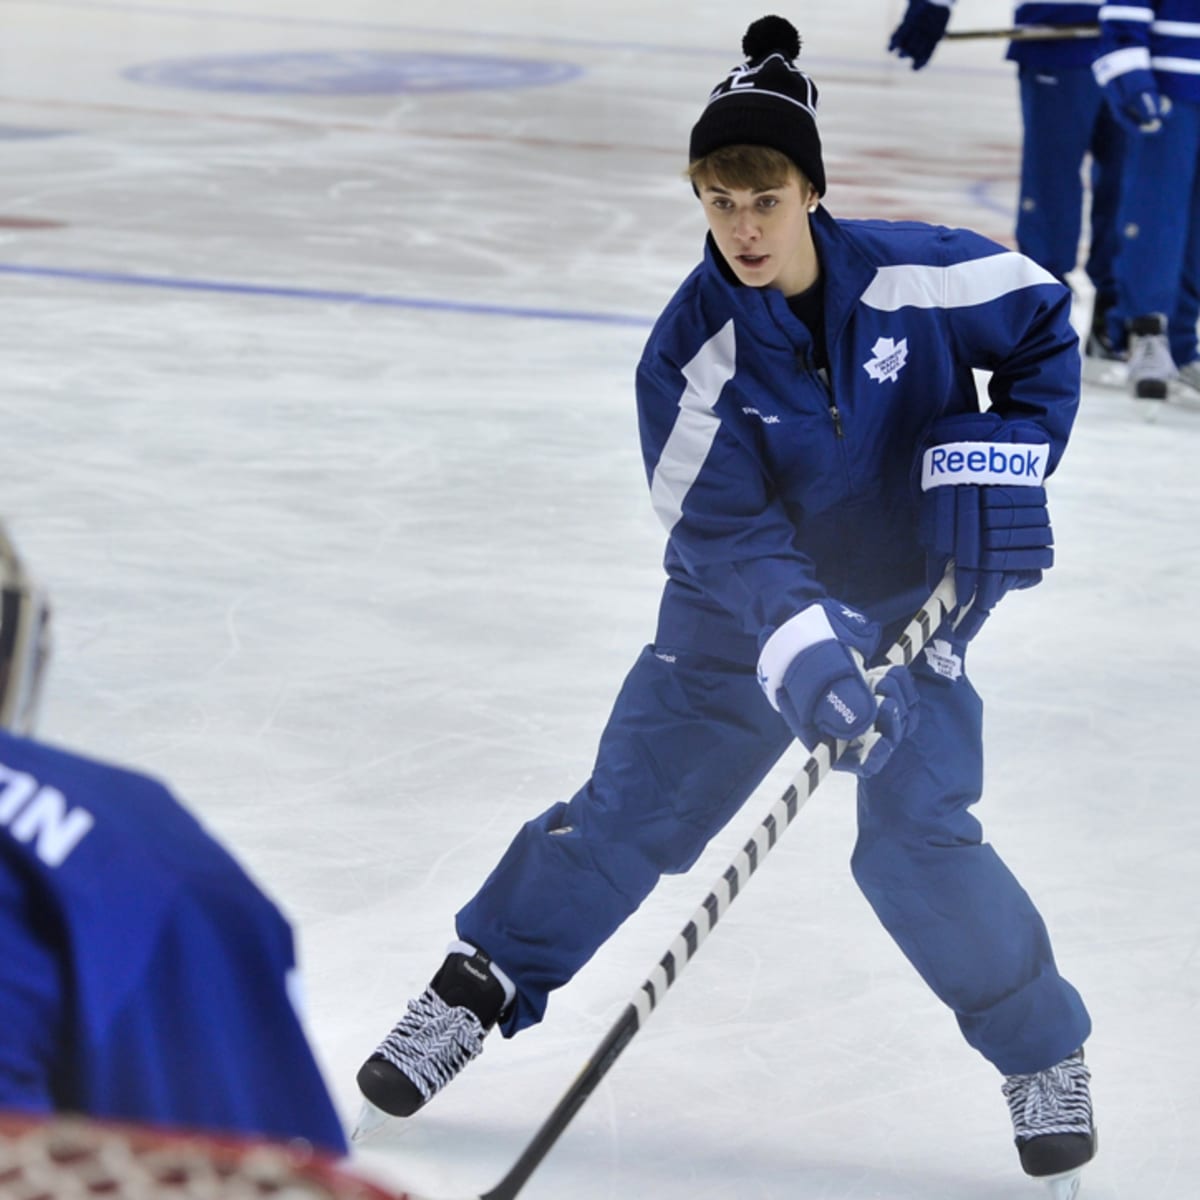 WATCH: Justin Bieber Almost Got In A Fight Playing Ice Hockey